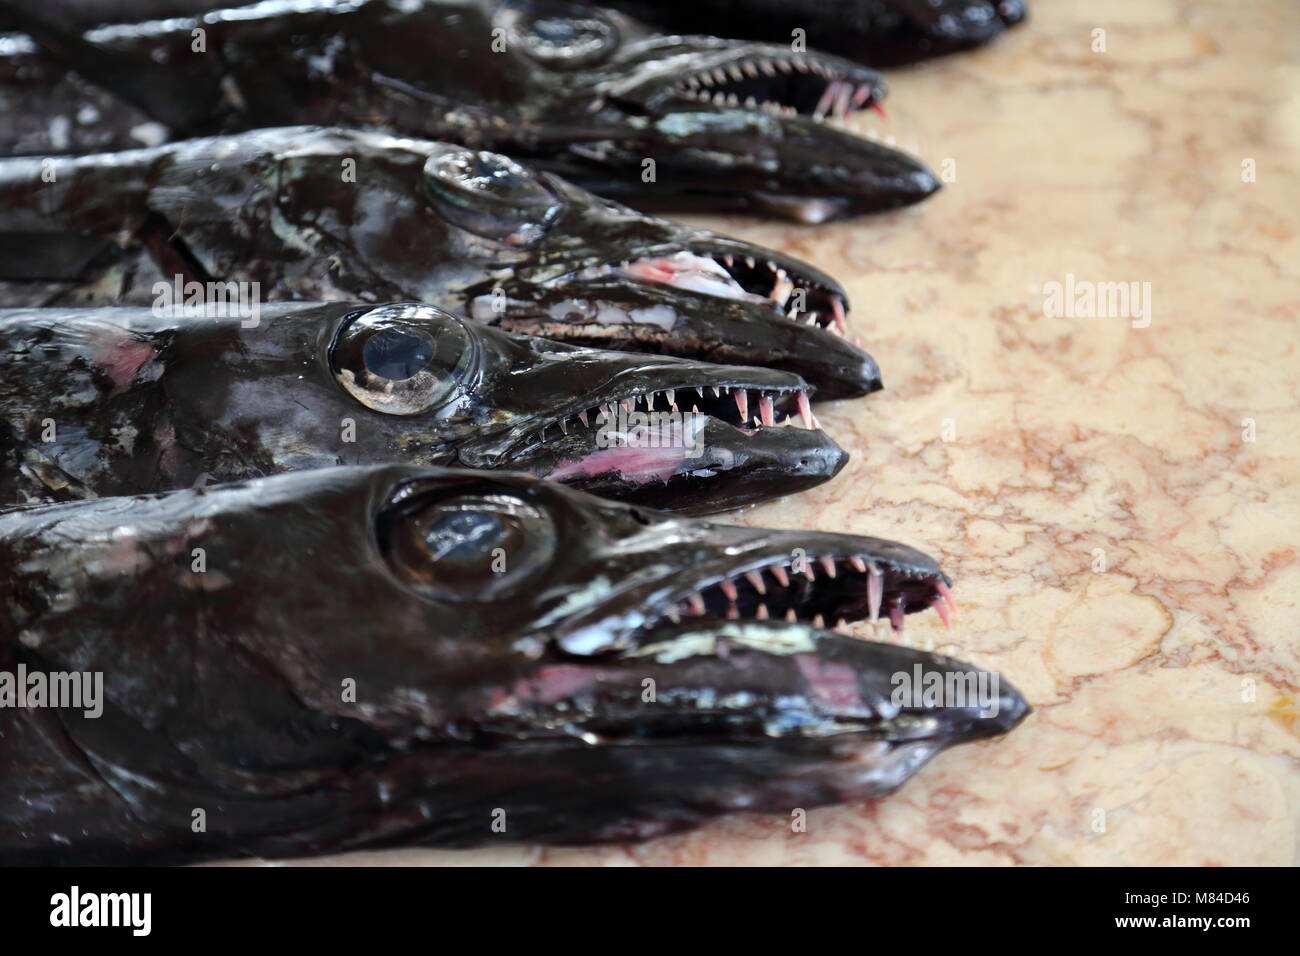 Traders offer fresh Scabbard fish at the local market at Funchal, Madeira, Portugal Stock Photo